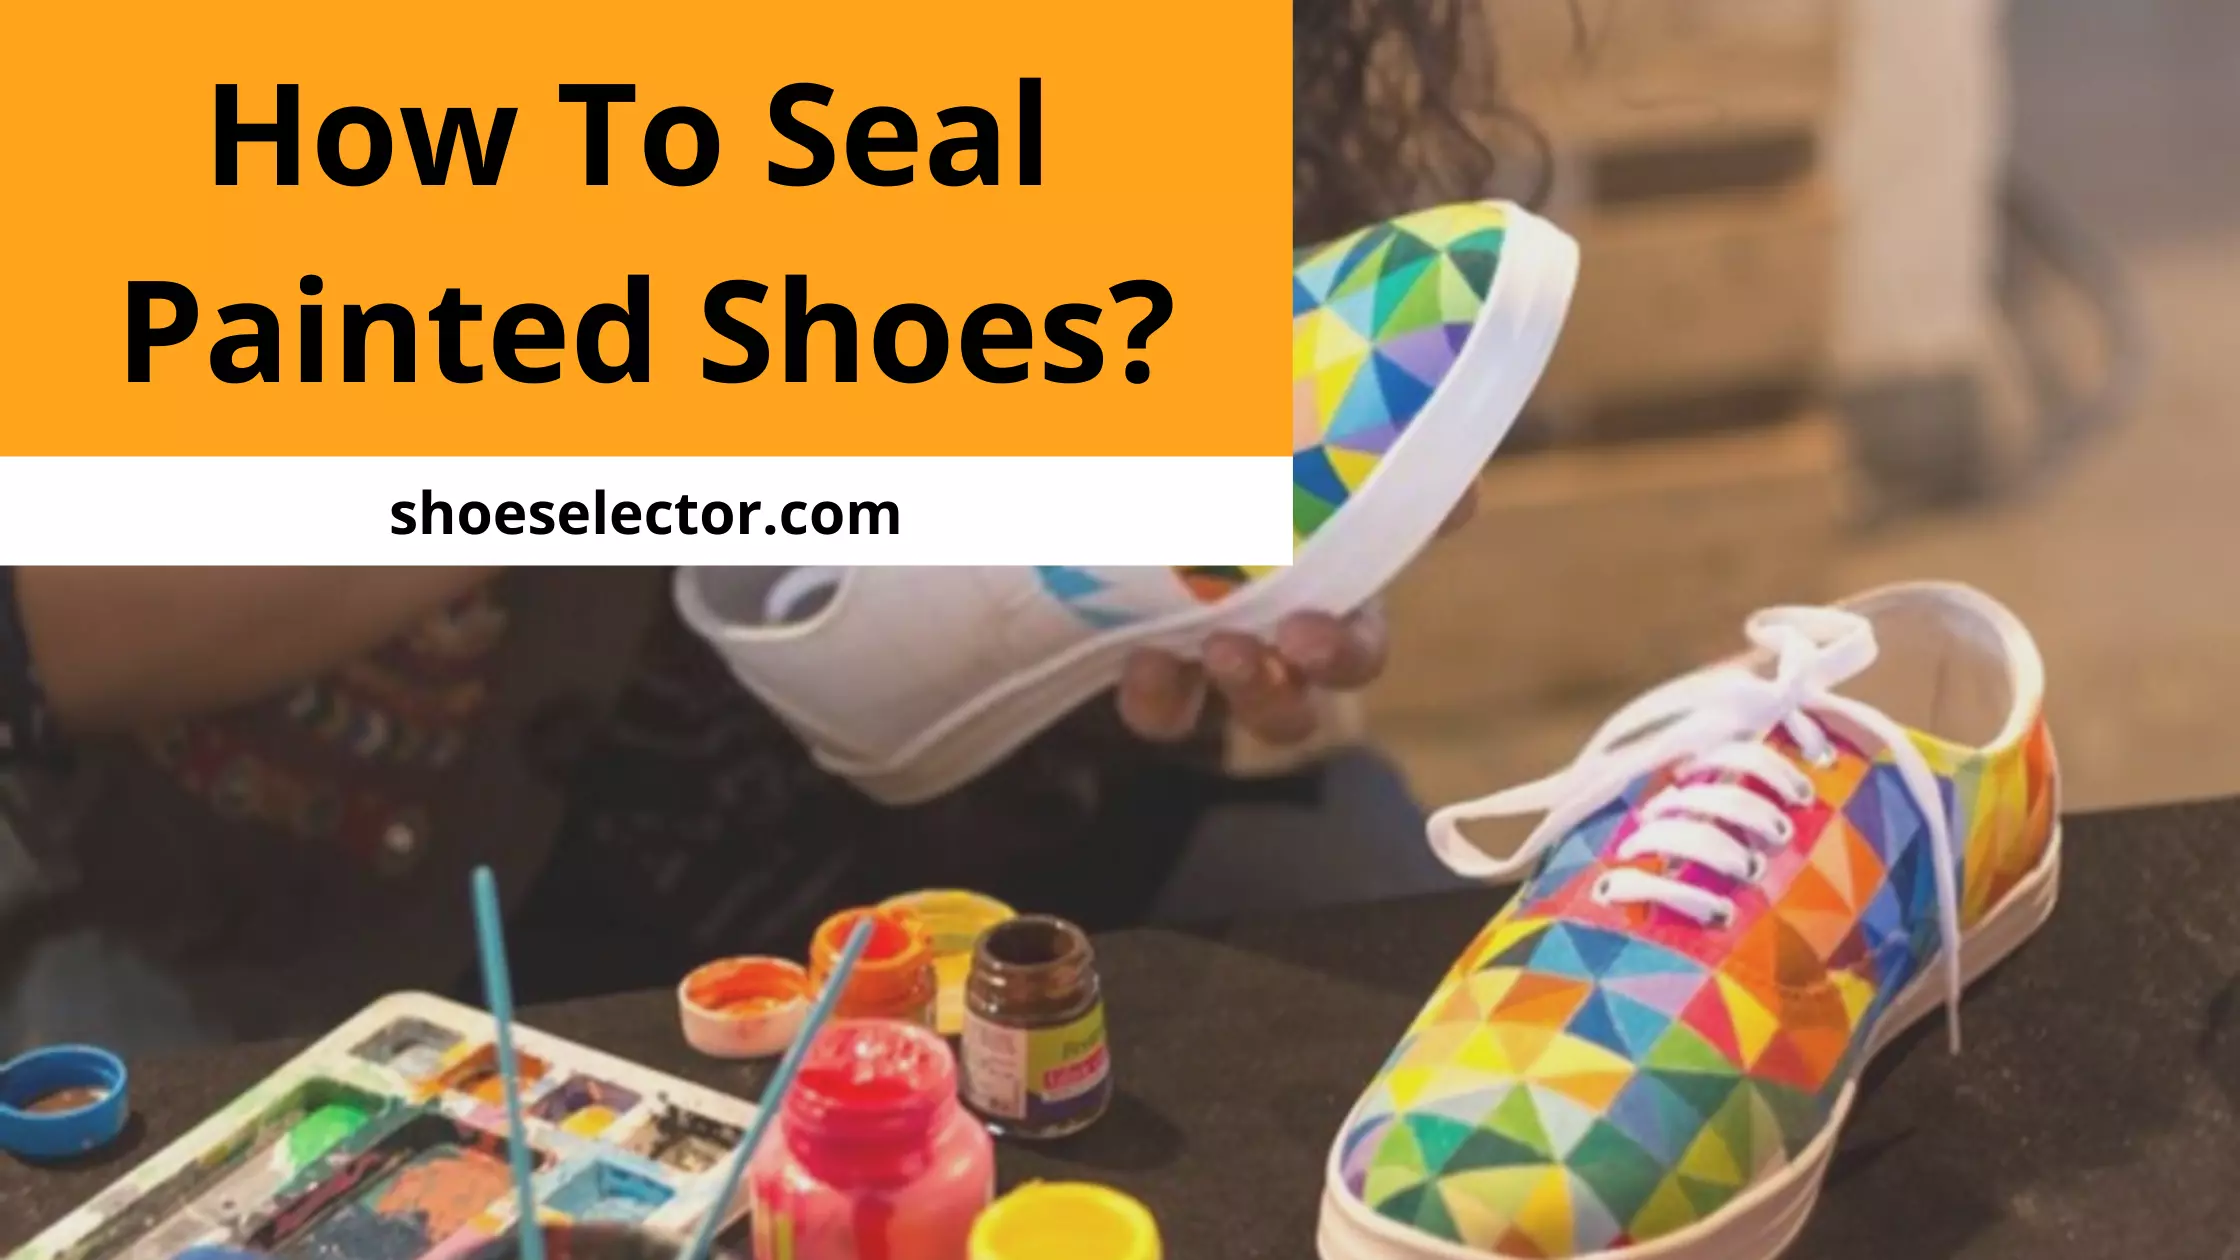 How To Seal Painted Shoes - An Easy Guide With 13 Steps